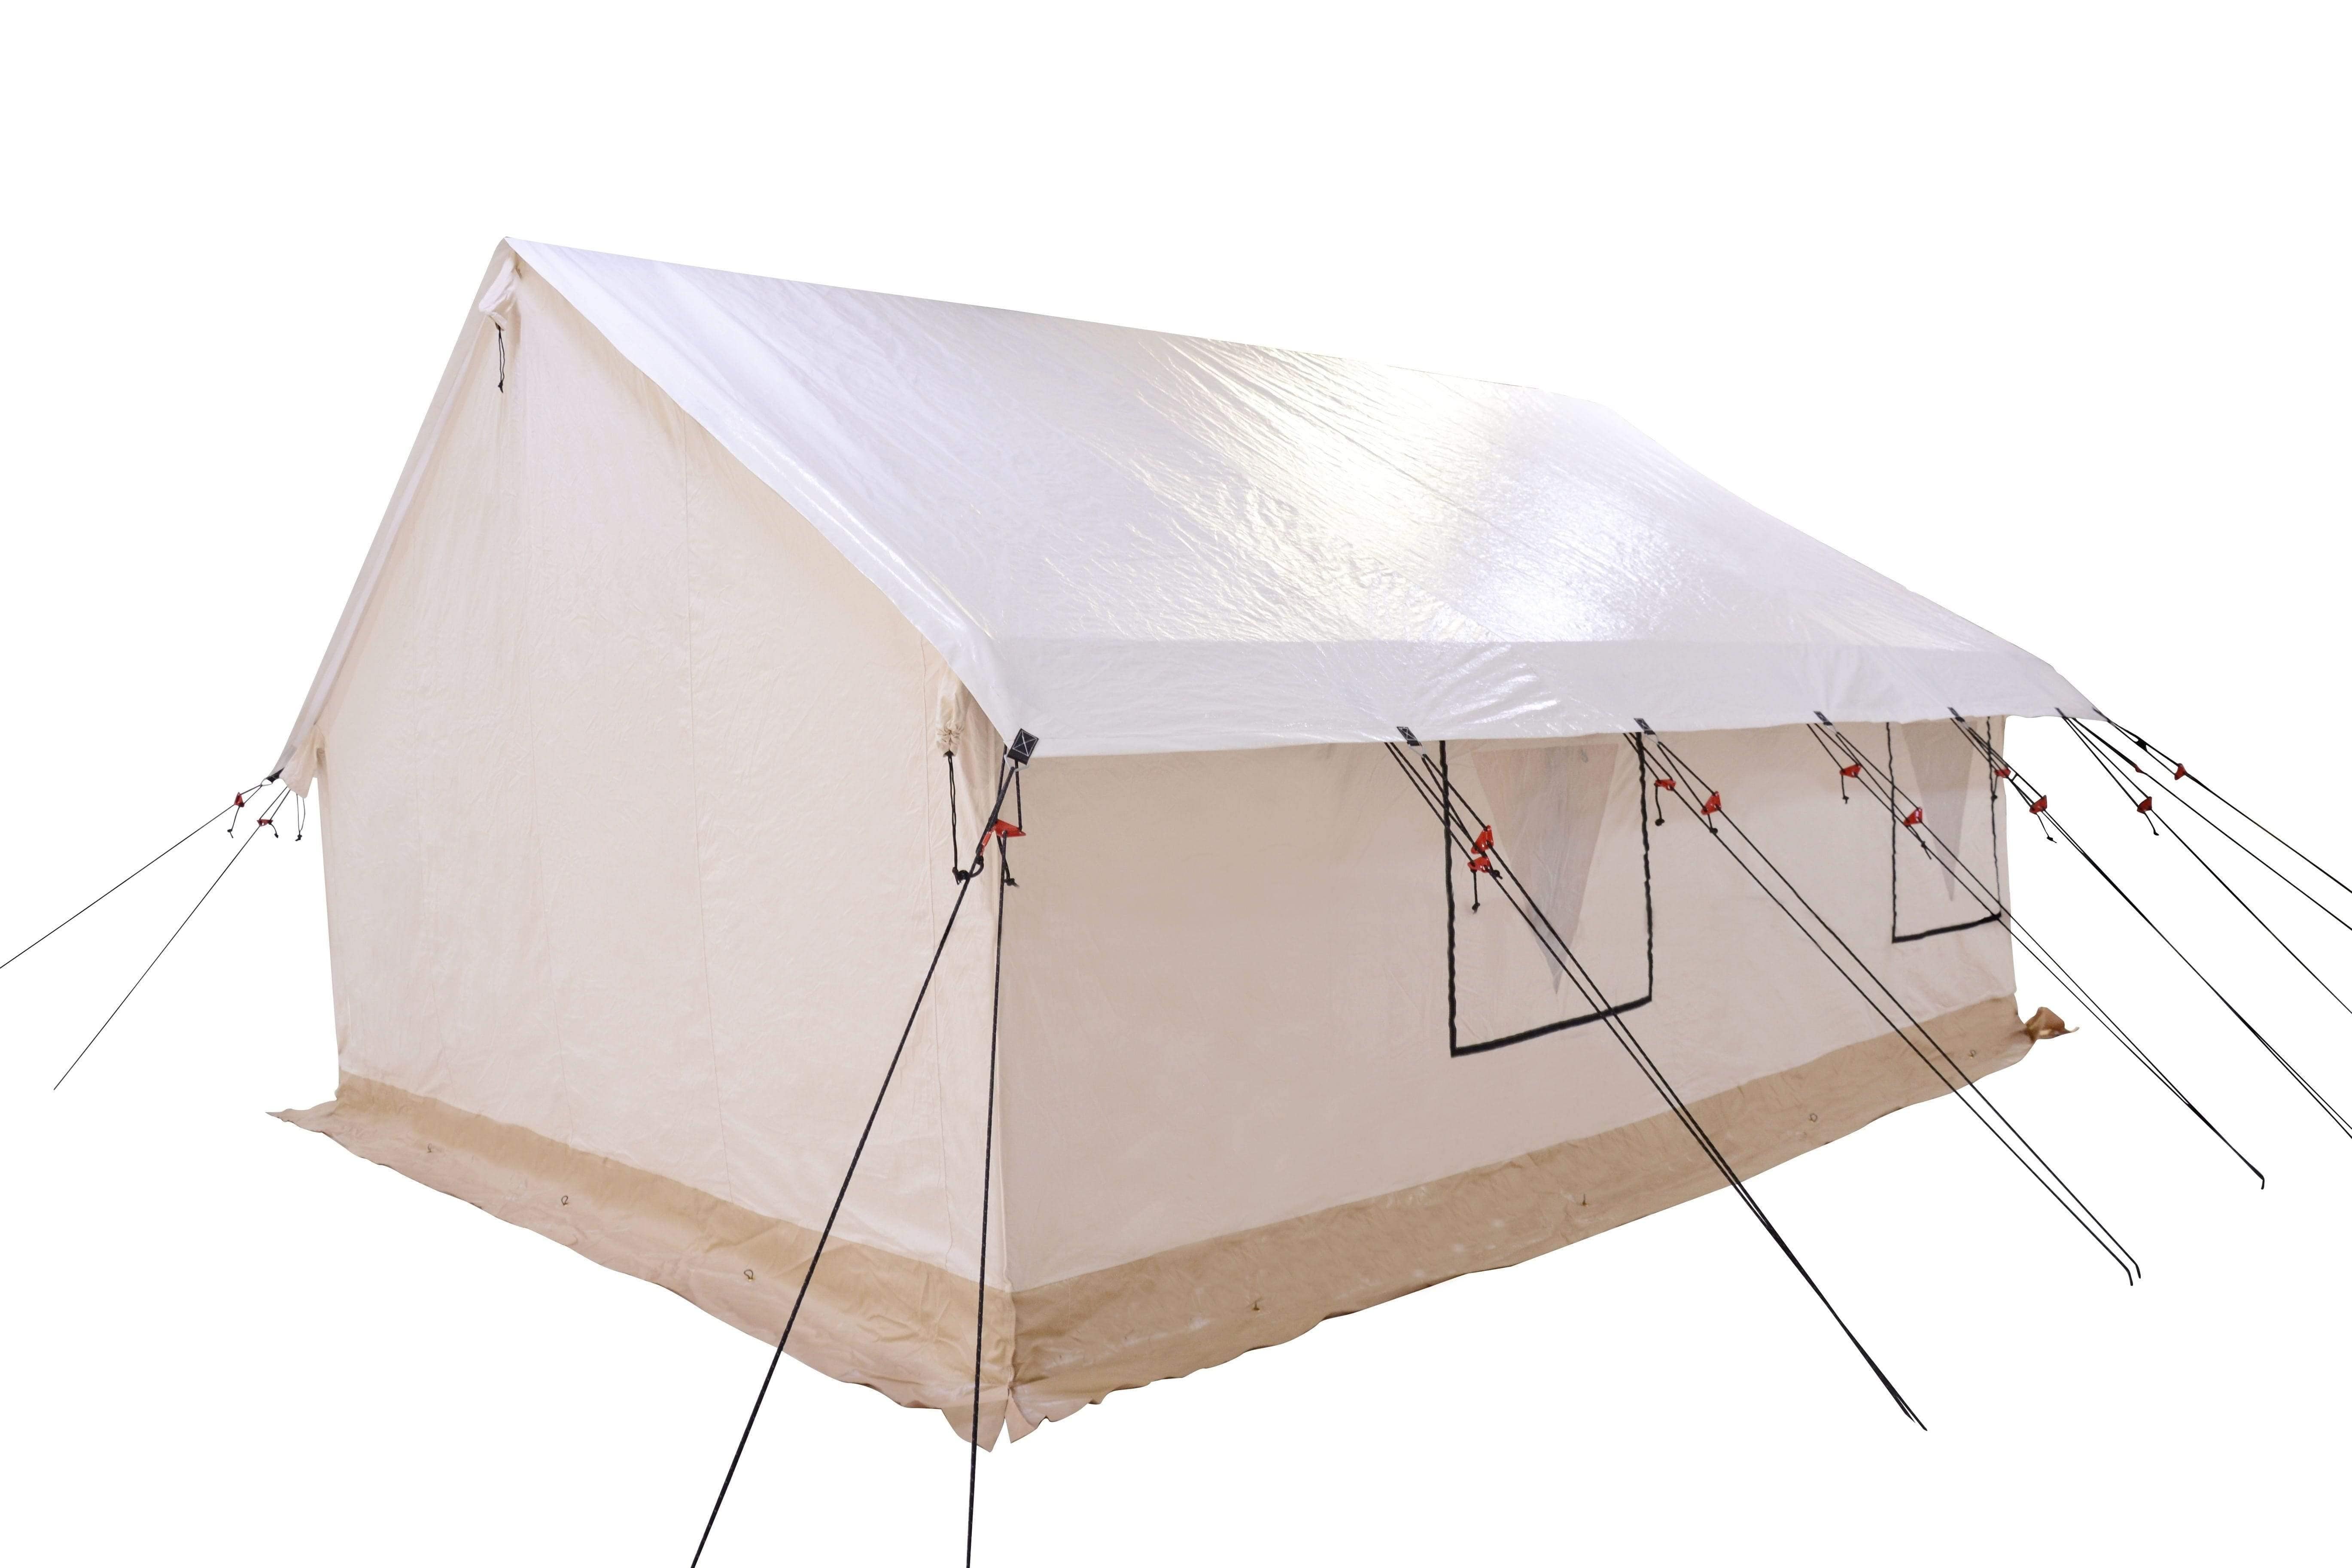 12’x14’ Fly Sheet - Canvas Wall Tent